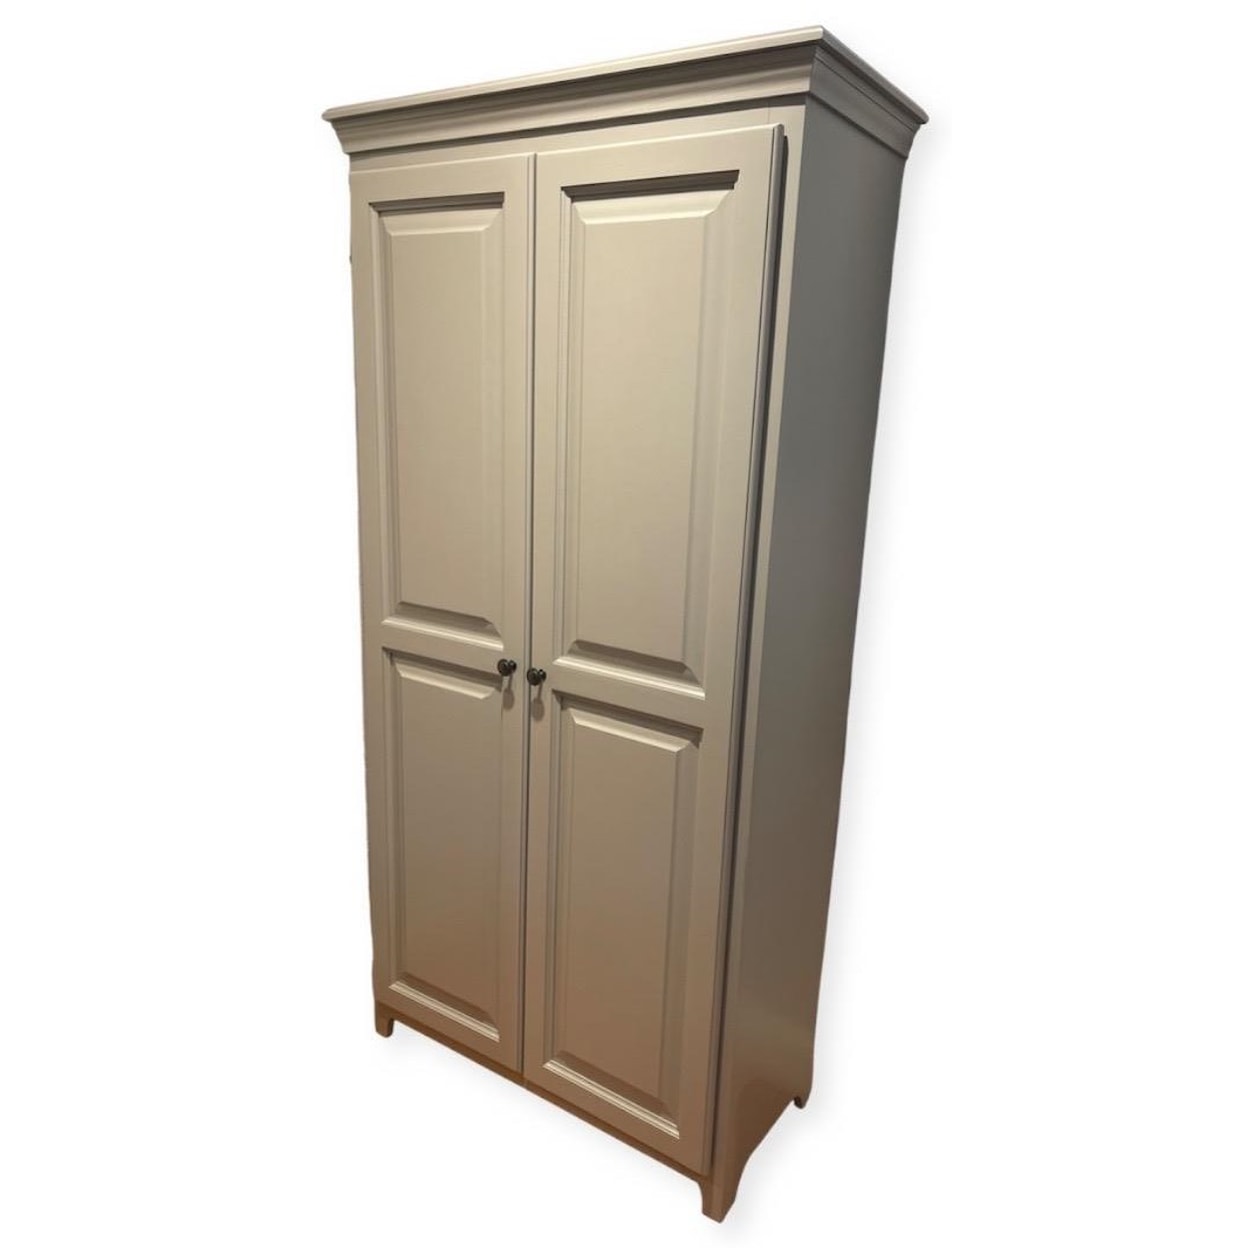 Archbold Furniture Pantries and Cabinets 2 Door Pantry